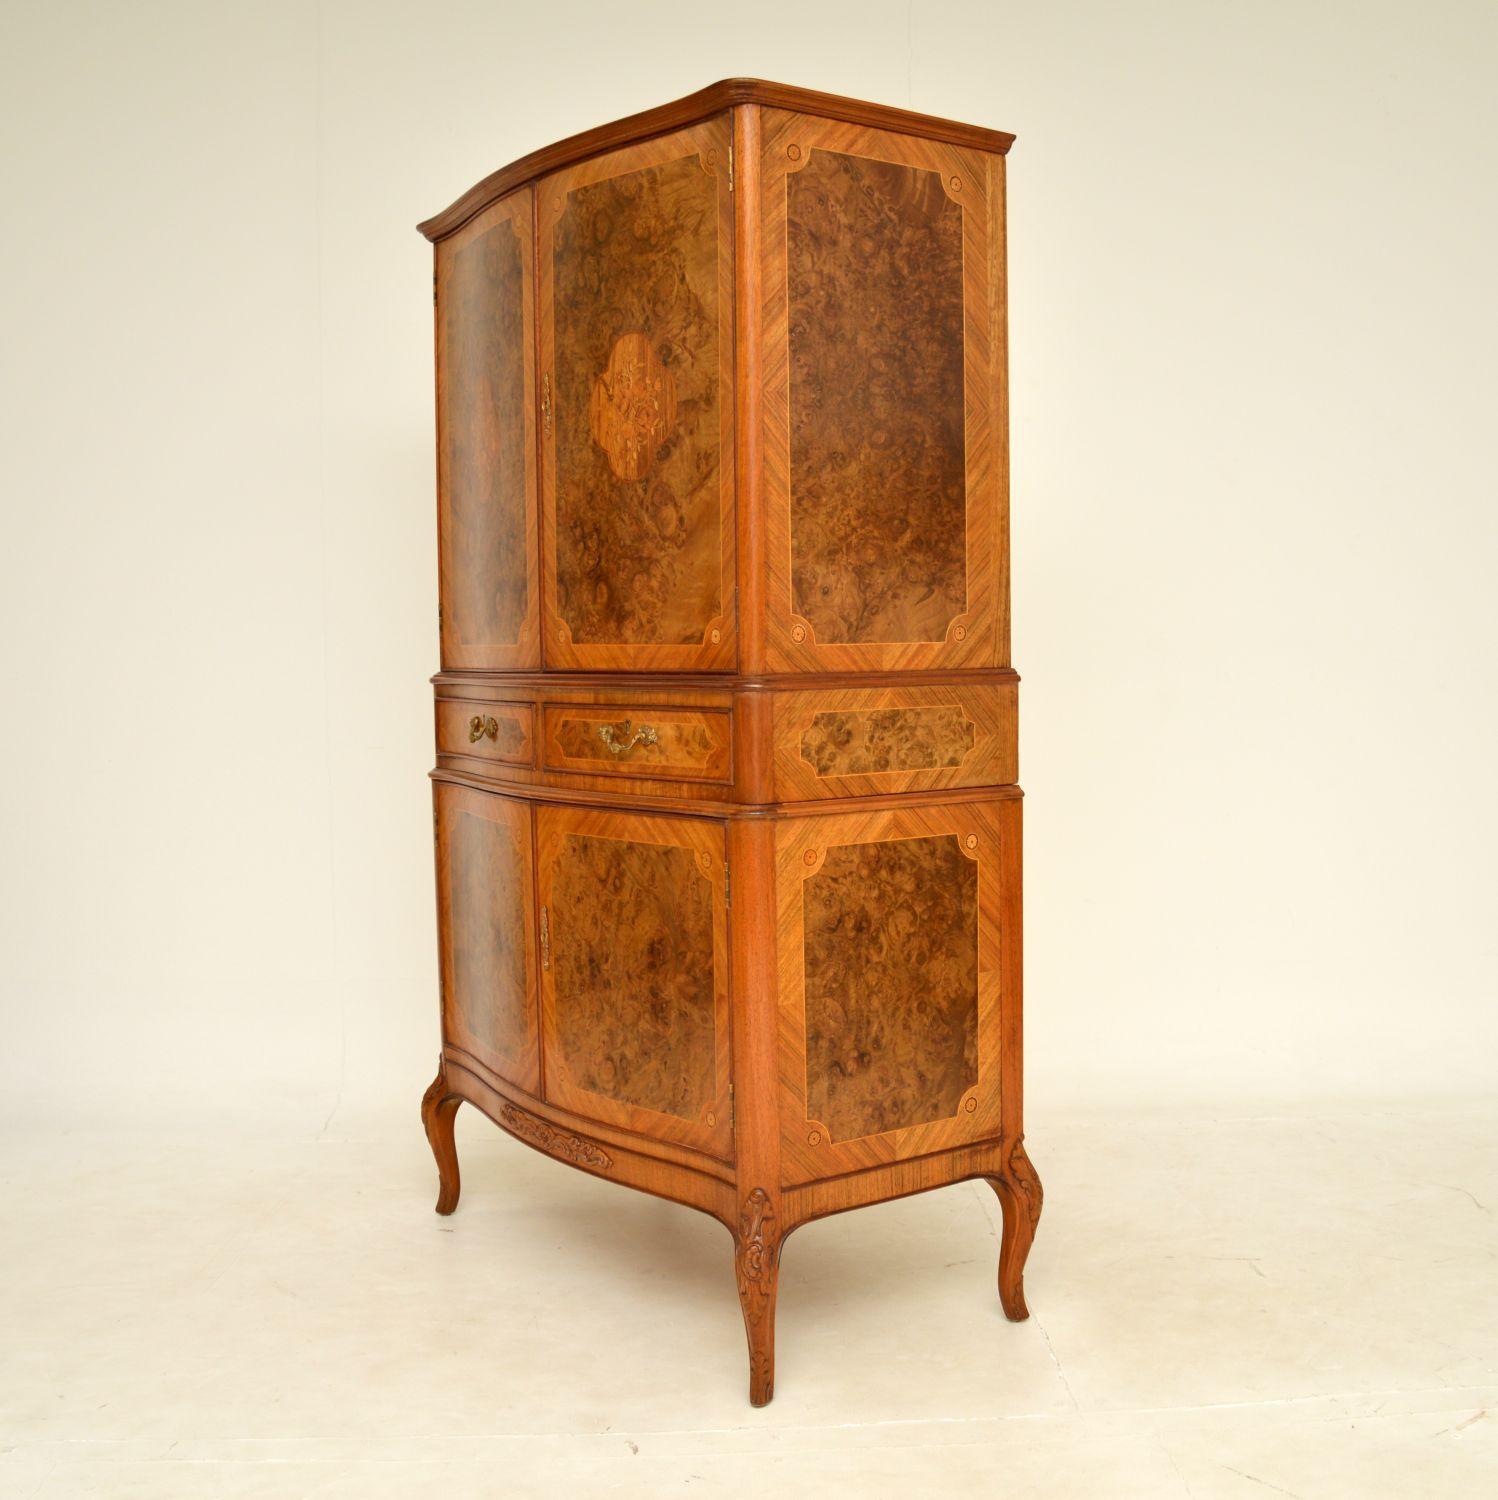 British Antique French Inlaid Walnut Cocktail Drinks Cabinet For Sale